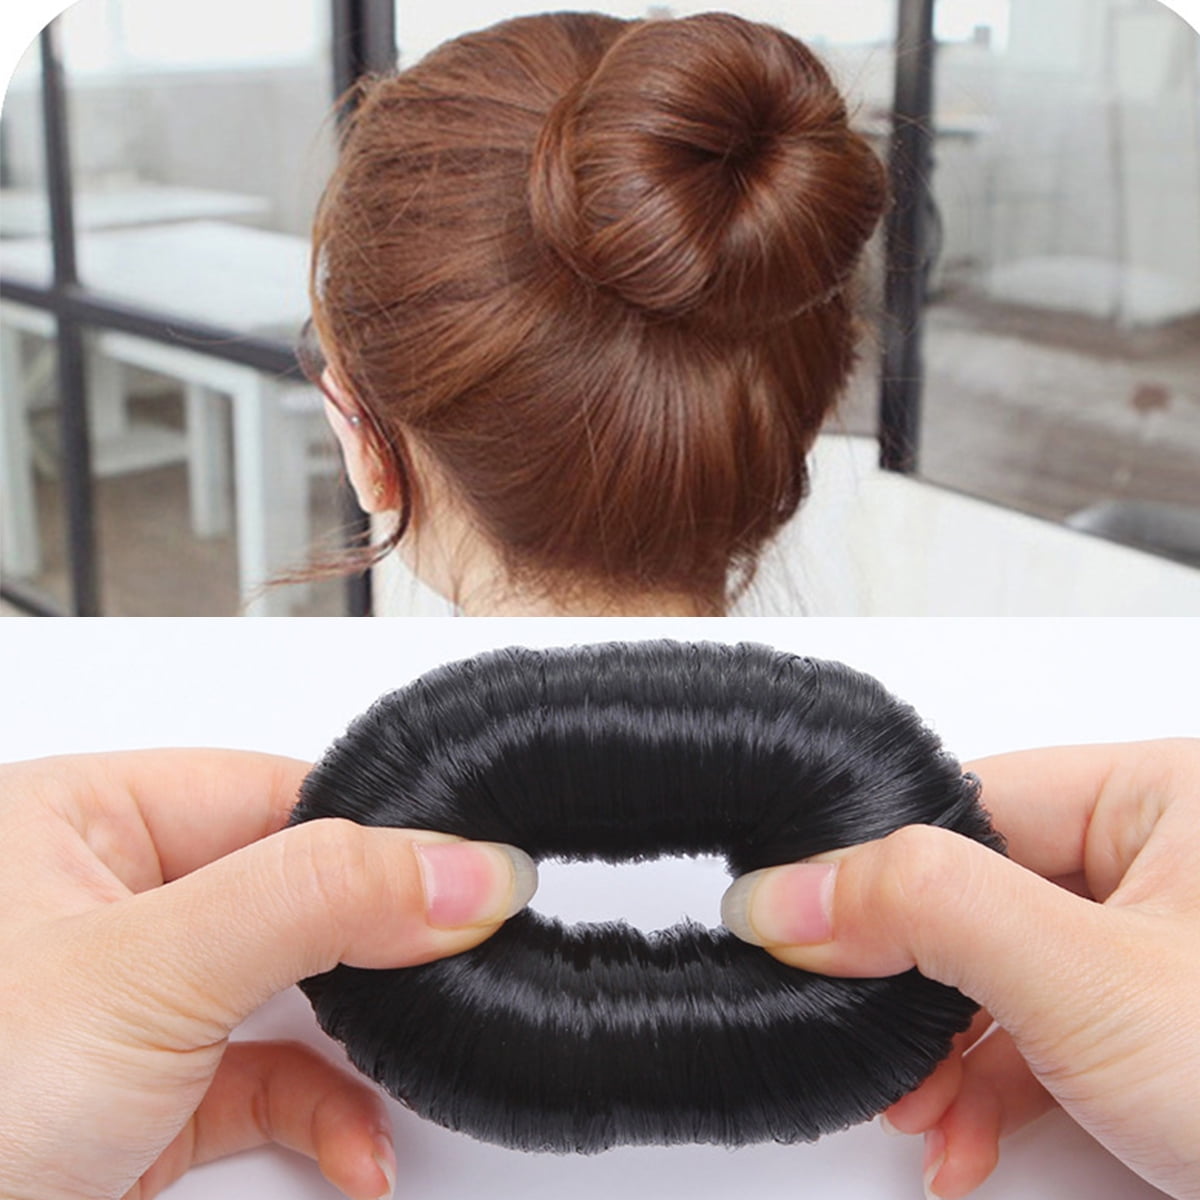 The Ballerina Bun Is the Easiest Way to Try the Balletcore Trend